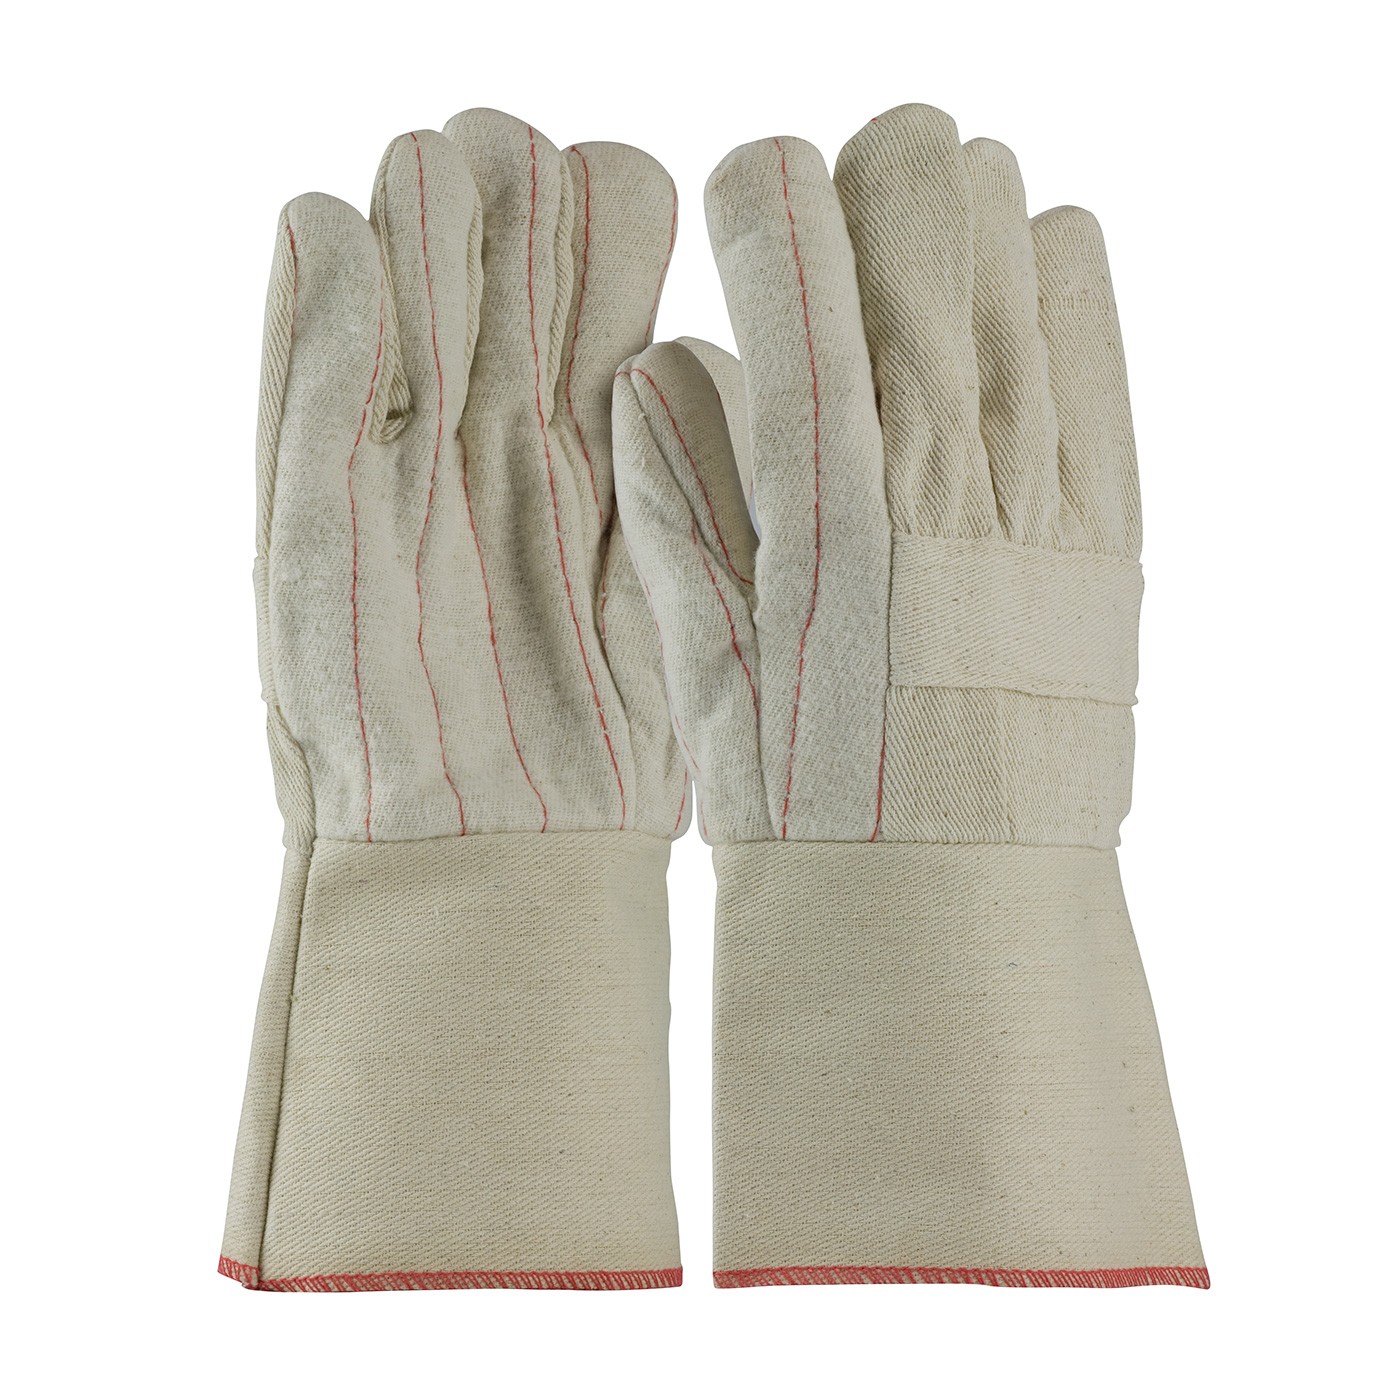 PIP® Premium Grade Hot Mill Glove with Three-Layers of Cotton Canvas and Burlap Liner - 28 oz  (#94-928G)